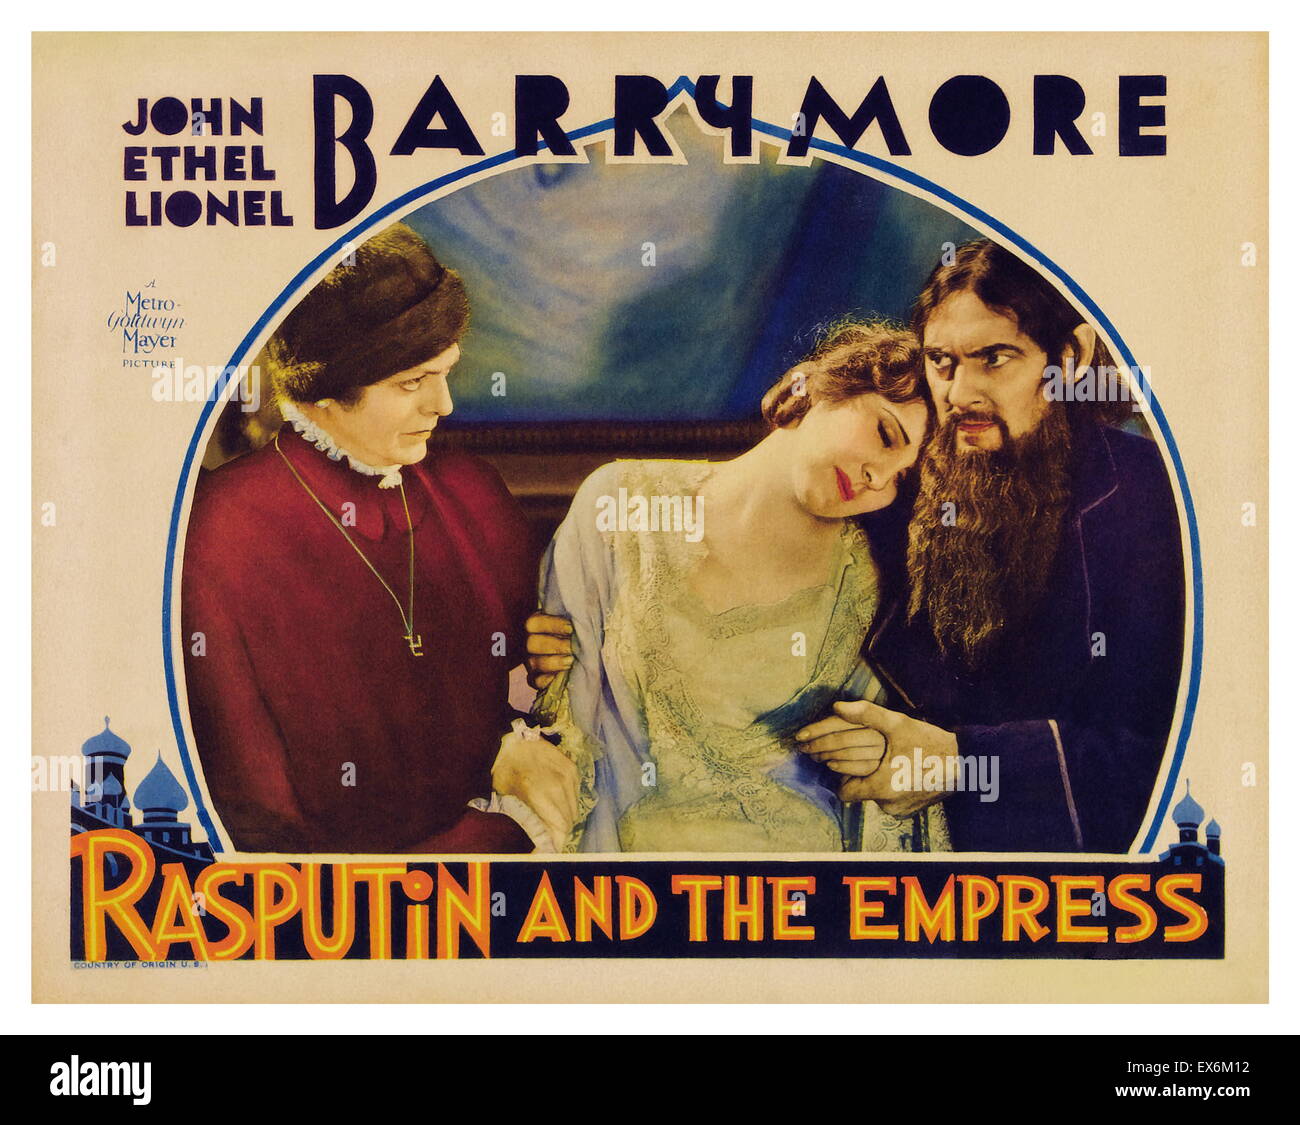 Rasputin and the Empress is a 1932 film about Imperial Russia starring the Barrymore siblings (John, as Prince Chegodieff; Ethel, as Czarina Alexandra; and Lionel Barrymore, as Grigori Rasputin). It is the only film in which all three siblings appear toge Stock Photo